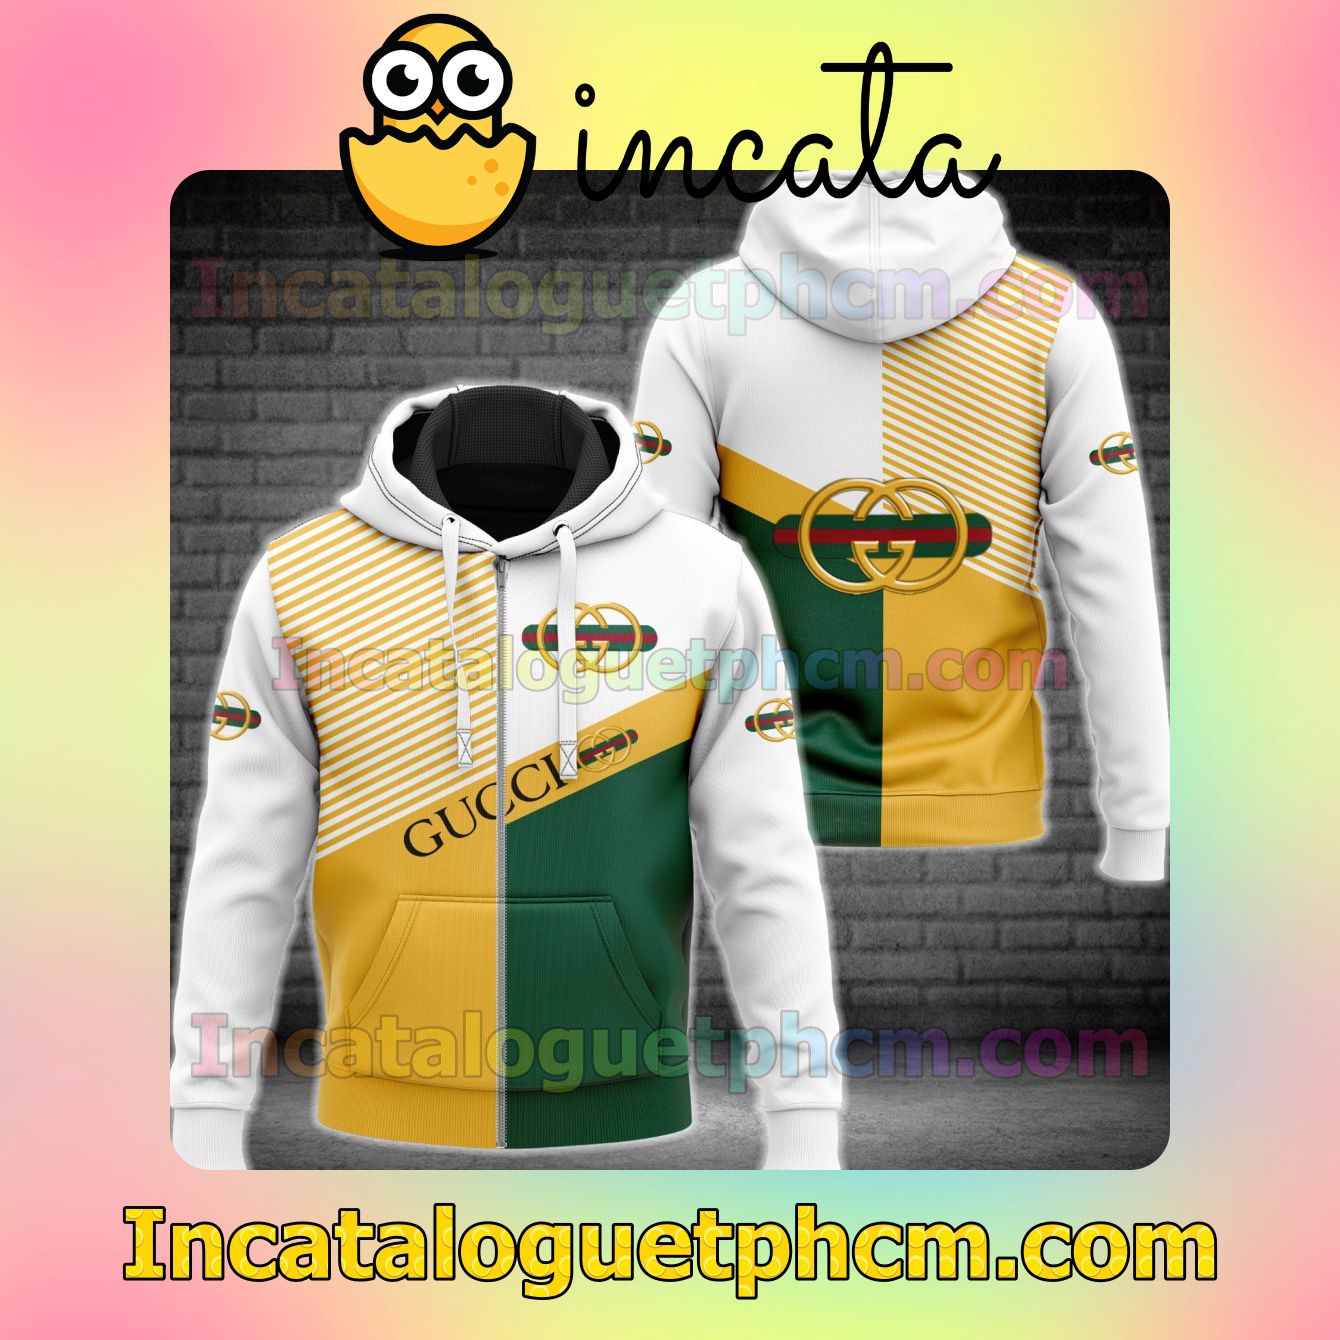 Gucci Stripe Logo White Mix Green And Yellow Long Sleeve Jacket Mens Hoodie